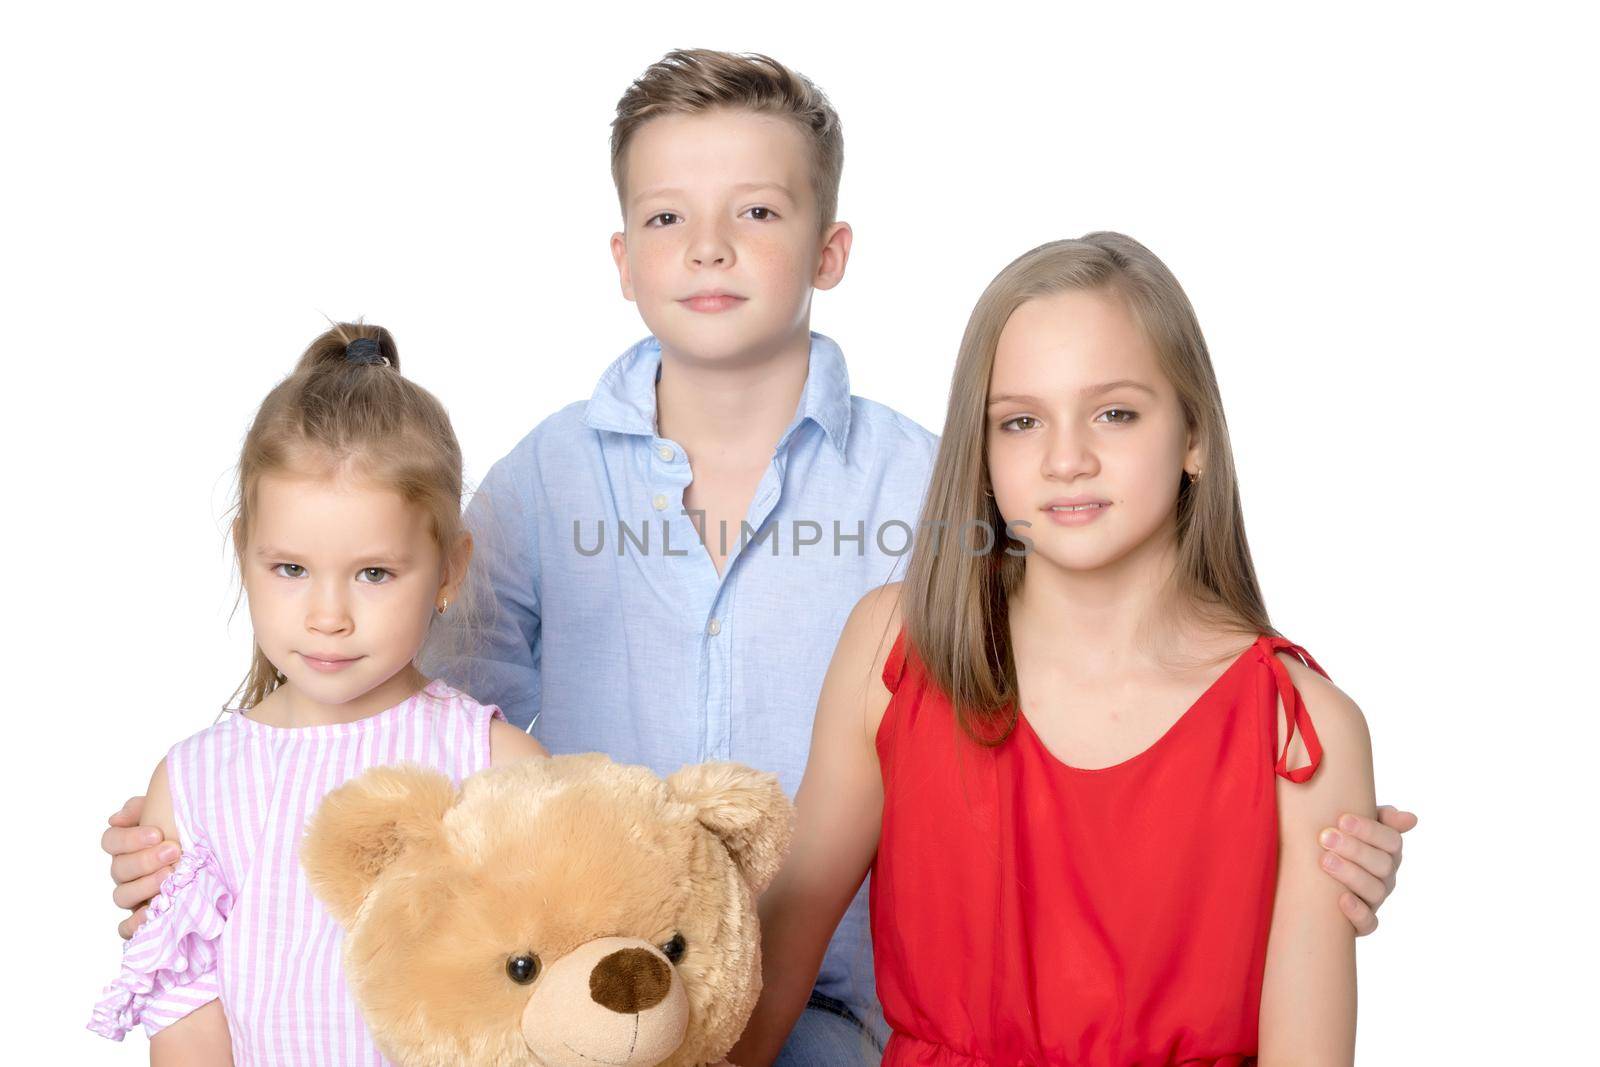 Brother and two sisters with a teddy bear. The concept of a happy childhood, a holiday, people, the harmonious development of a child in the family. Isolated on white background.